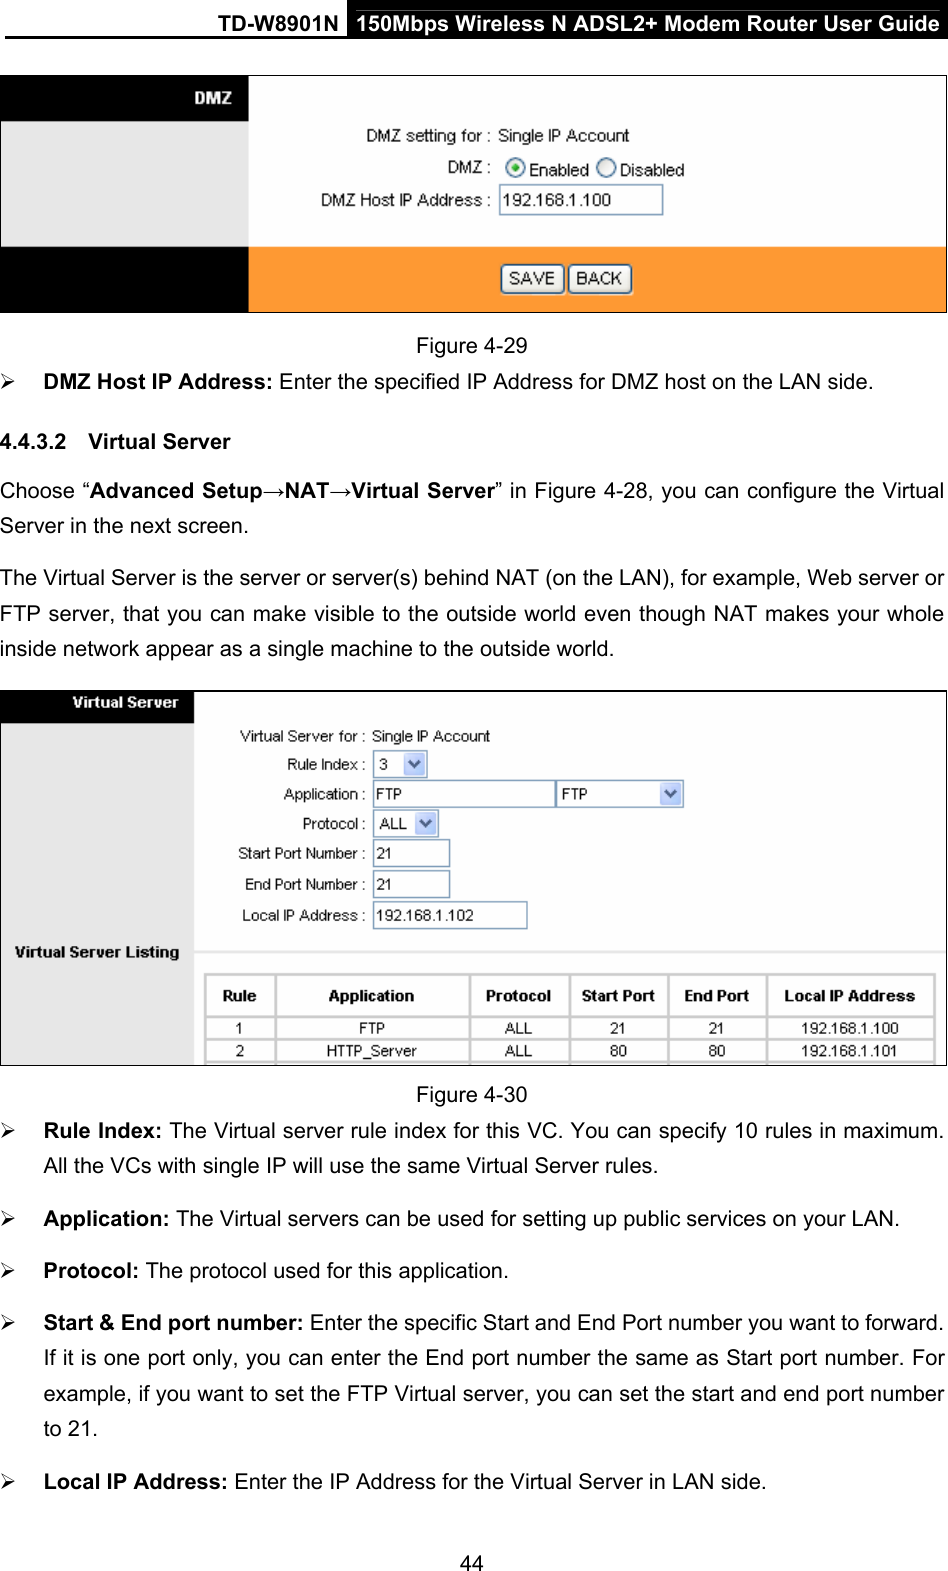 TD-W8901N  150Mbps Wireless N ADSL2+ Modem Router User Guide 44  Figure 4-29  DMZ Host IP Address: Enter the specified IP Address for DMZ host on the LAN side. 4.4.3.2  Virtual Server Choose “Advanced Setup→NAT→Virtual Server” in Figure 4-28, you can configure the Virtual Server in the next screen.   The Virtual Server is the server or server(s) behind NAT (on the LAN), for example, Web server or FTP server, that you can make visible to the outside world even though NAT makes your whole inside network appear as a single machine to the outside world.  Figure 4-30  Rule Index: The Virtual server rule index for this VC. You can specify 10 rules in maximum. All the VCs with single IP will use the same Virtual Server rules.  Application: The Virtual servers can be used for setting up public services on your LAN.  Protocol: The protocol used for this application.  Start &amp; End port number: Enter the specific Start and End Port number you want to forward. If it is one port only, you can enter the End port number the same as Start port number. For example, if you want to set the FTP Virtual server, you can set the start and end port number to 21.  Local IP Address: Enter the IP Address for the Virtual Server in LAN side. 